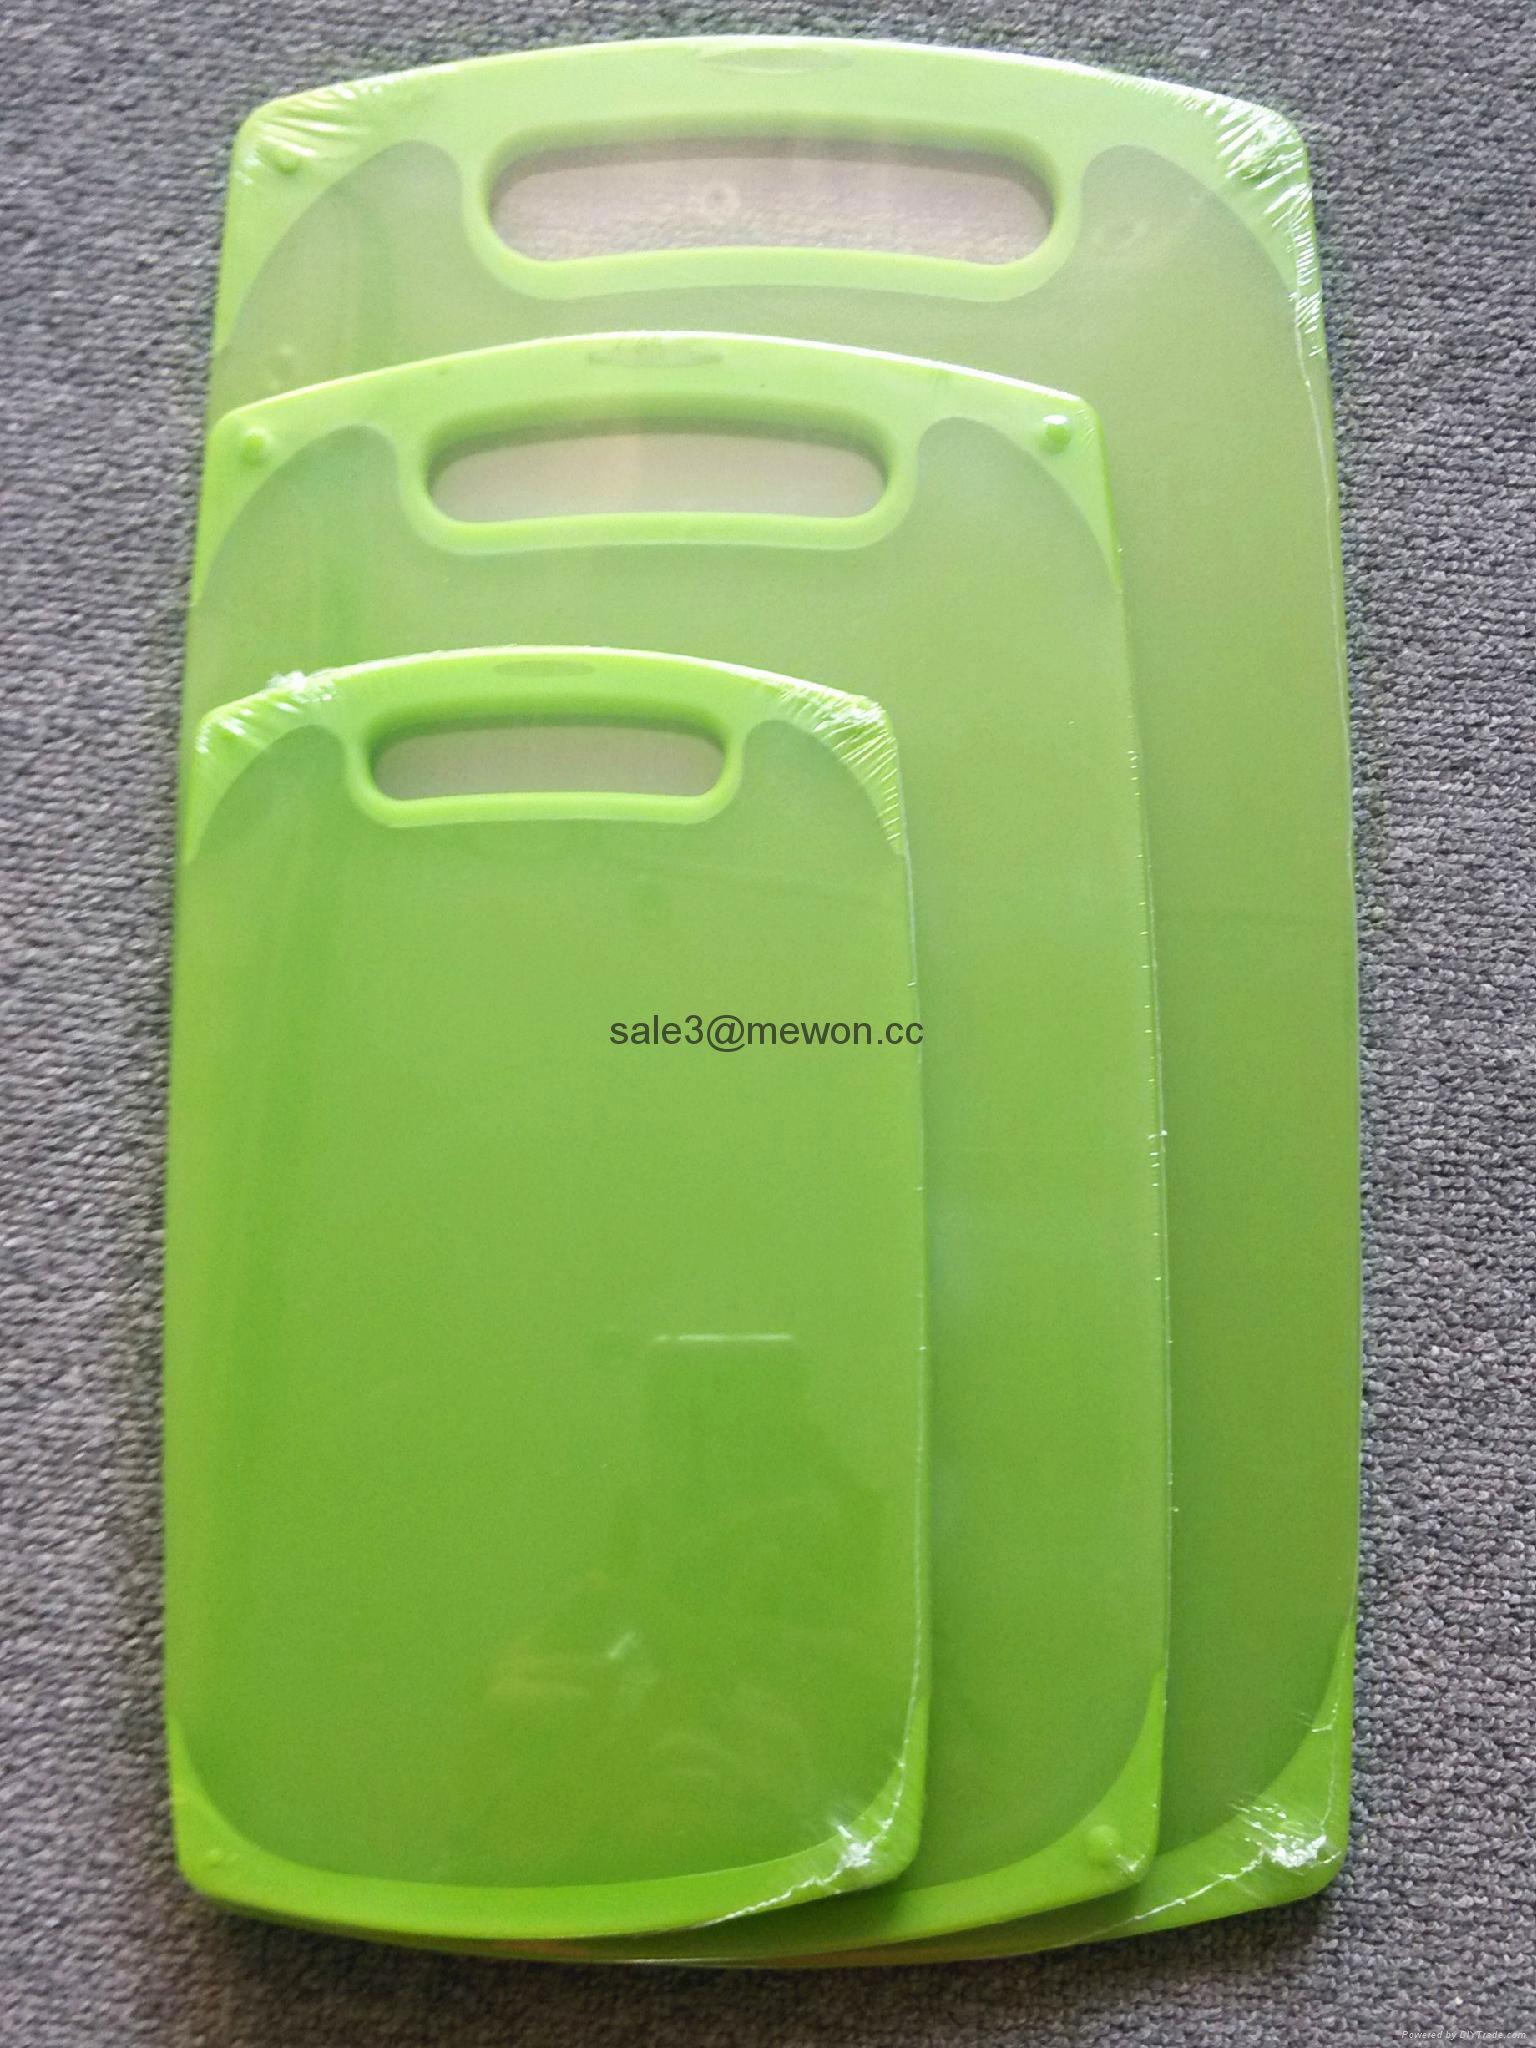 double color pp and tpr plastic cutting board